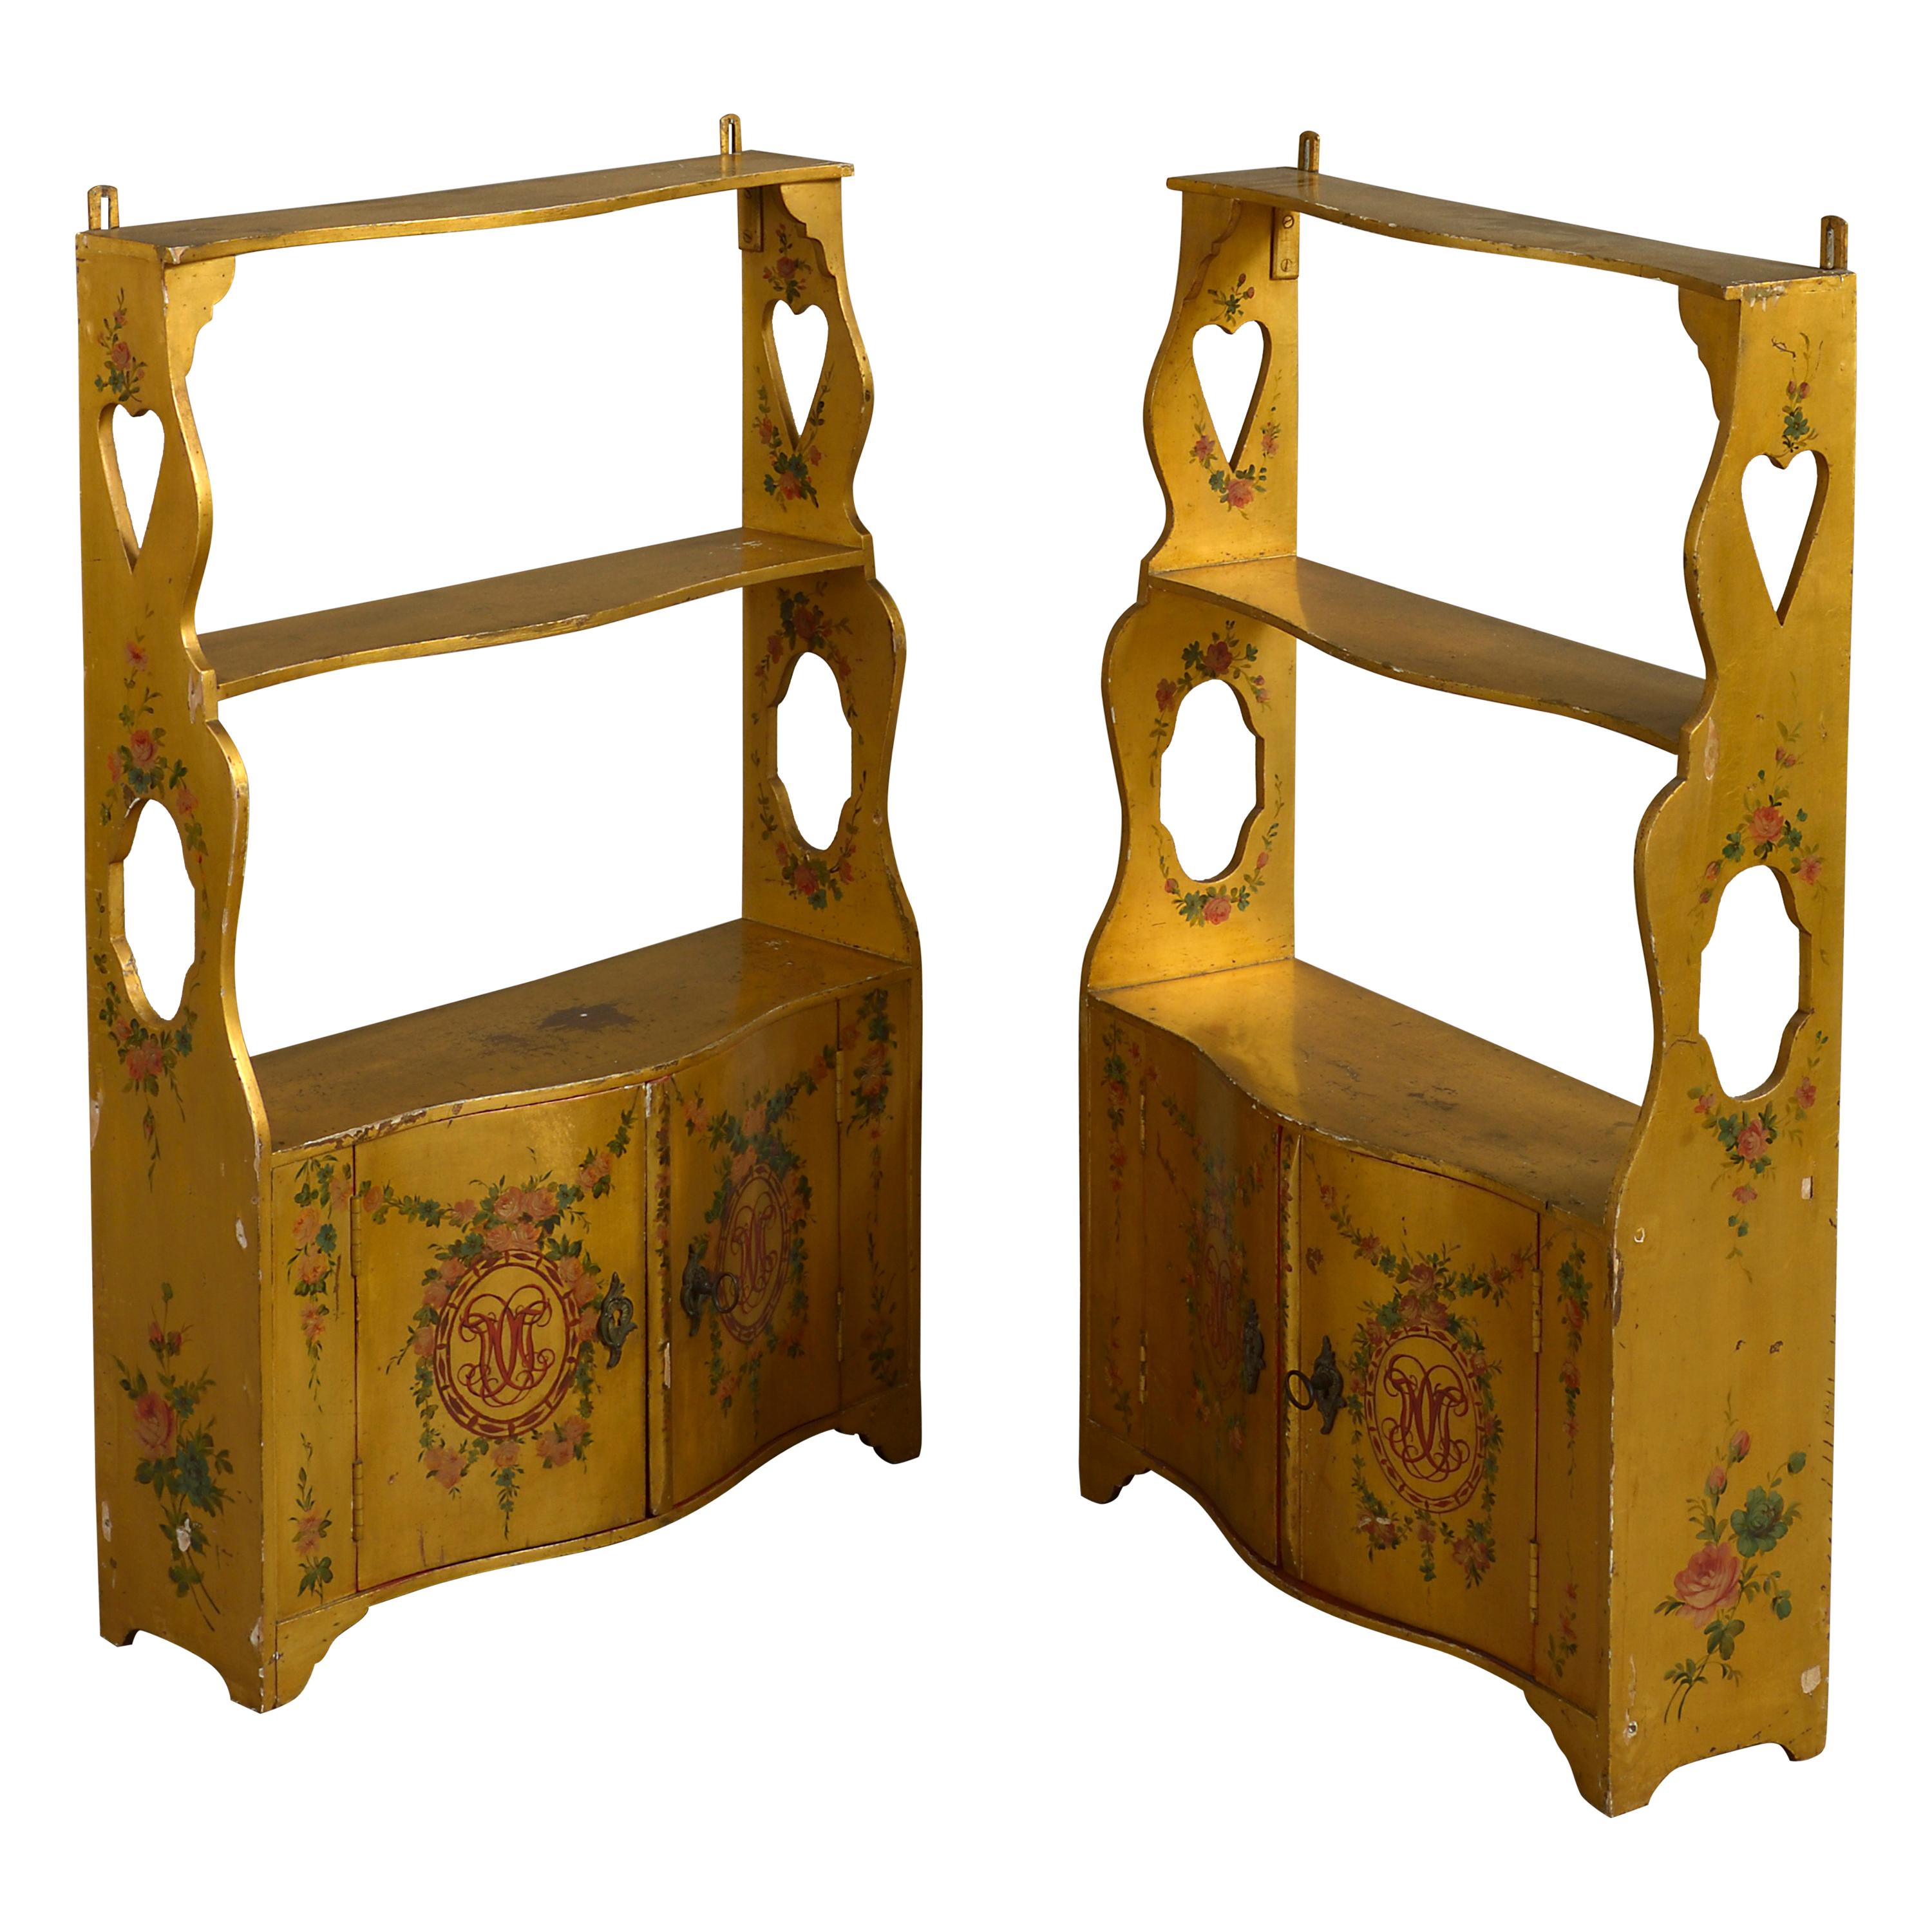 Pair of 18th Century Yellow Painted Hanging Shelves